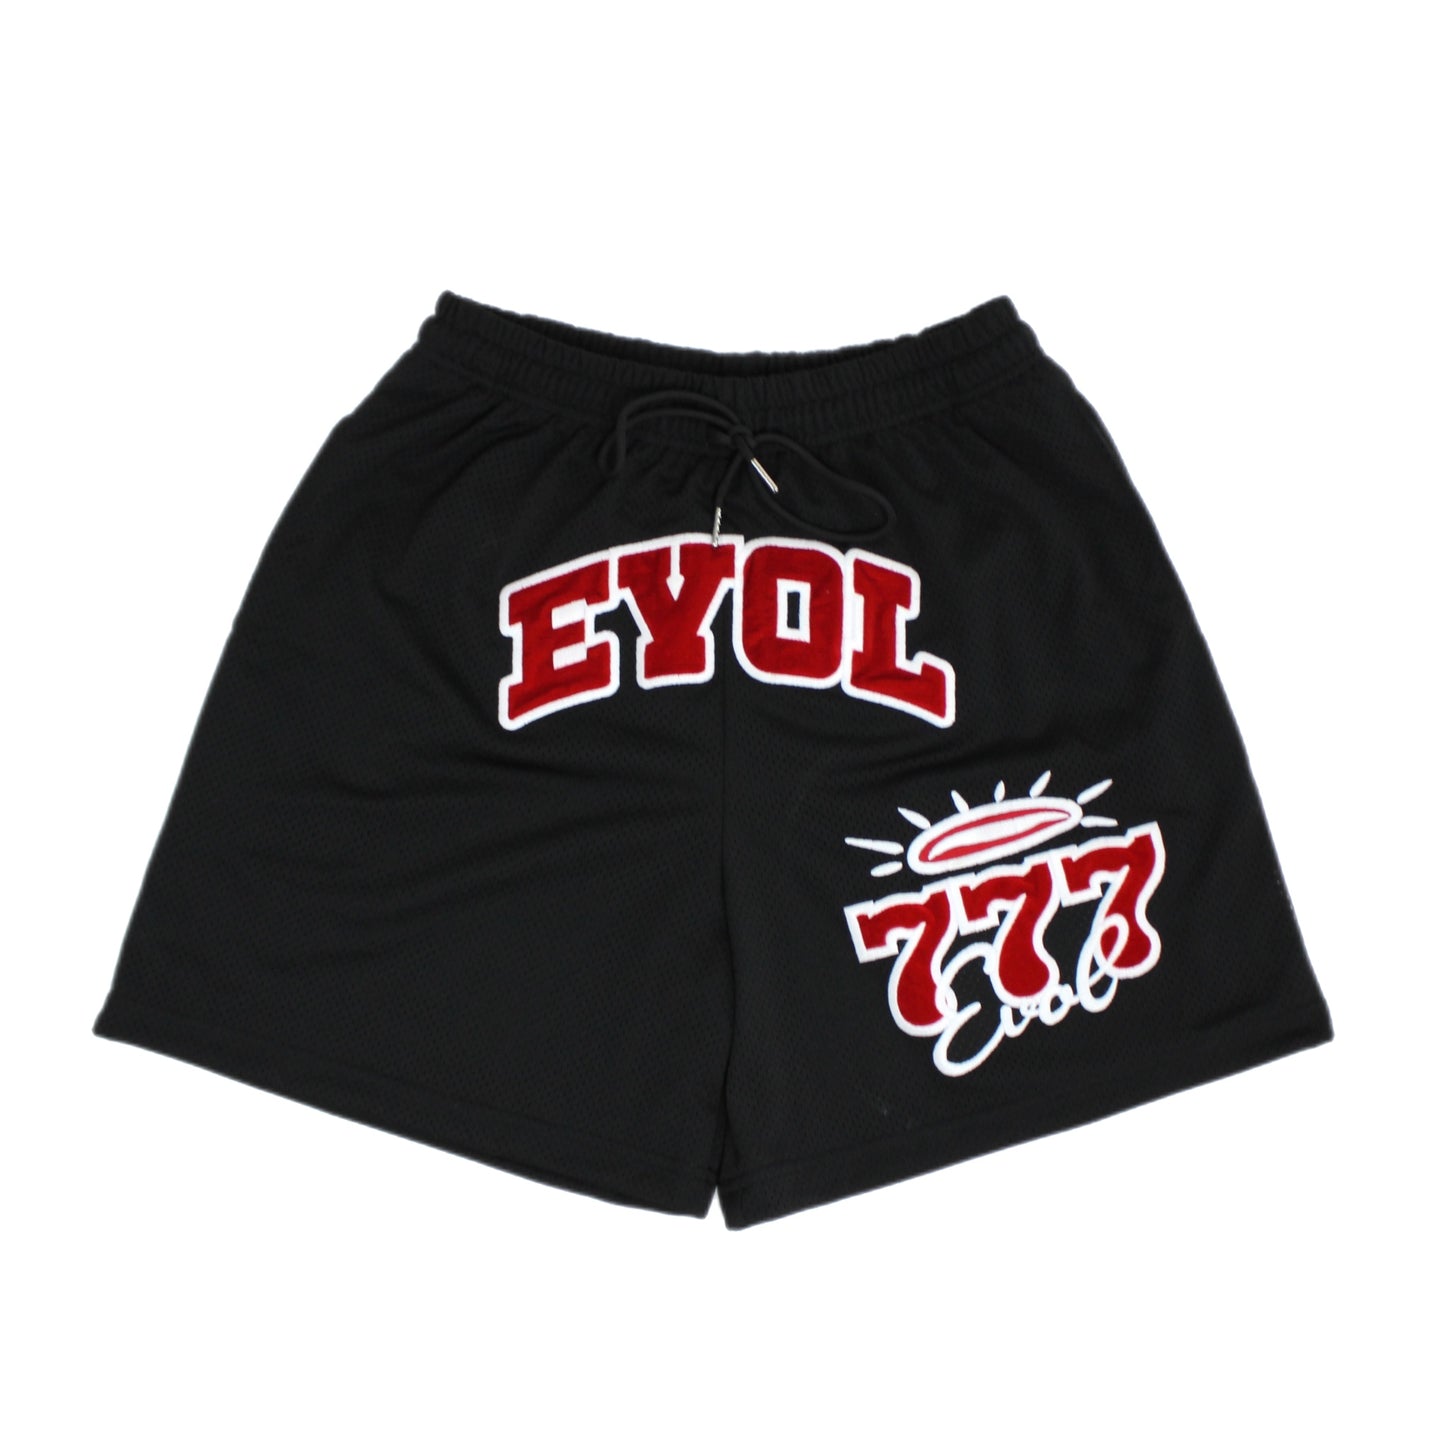 EVOL 777 Shorts Black And Red